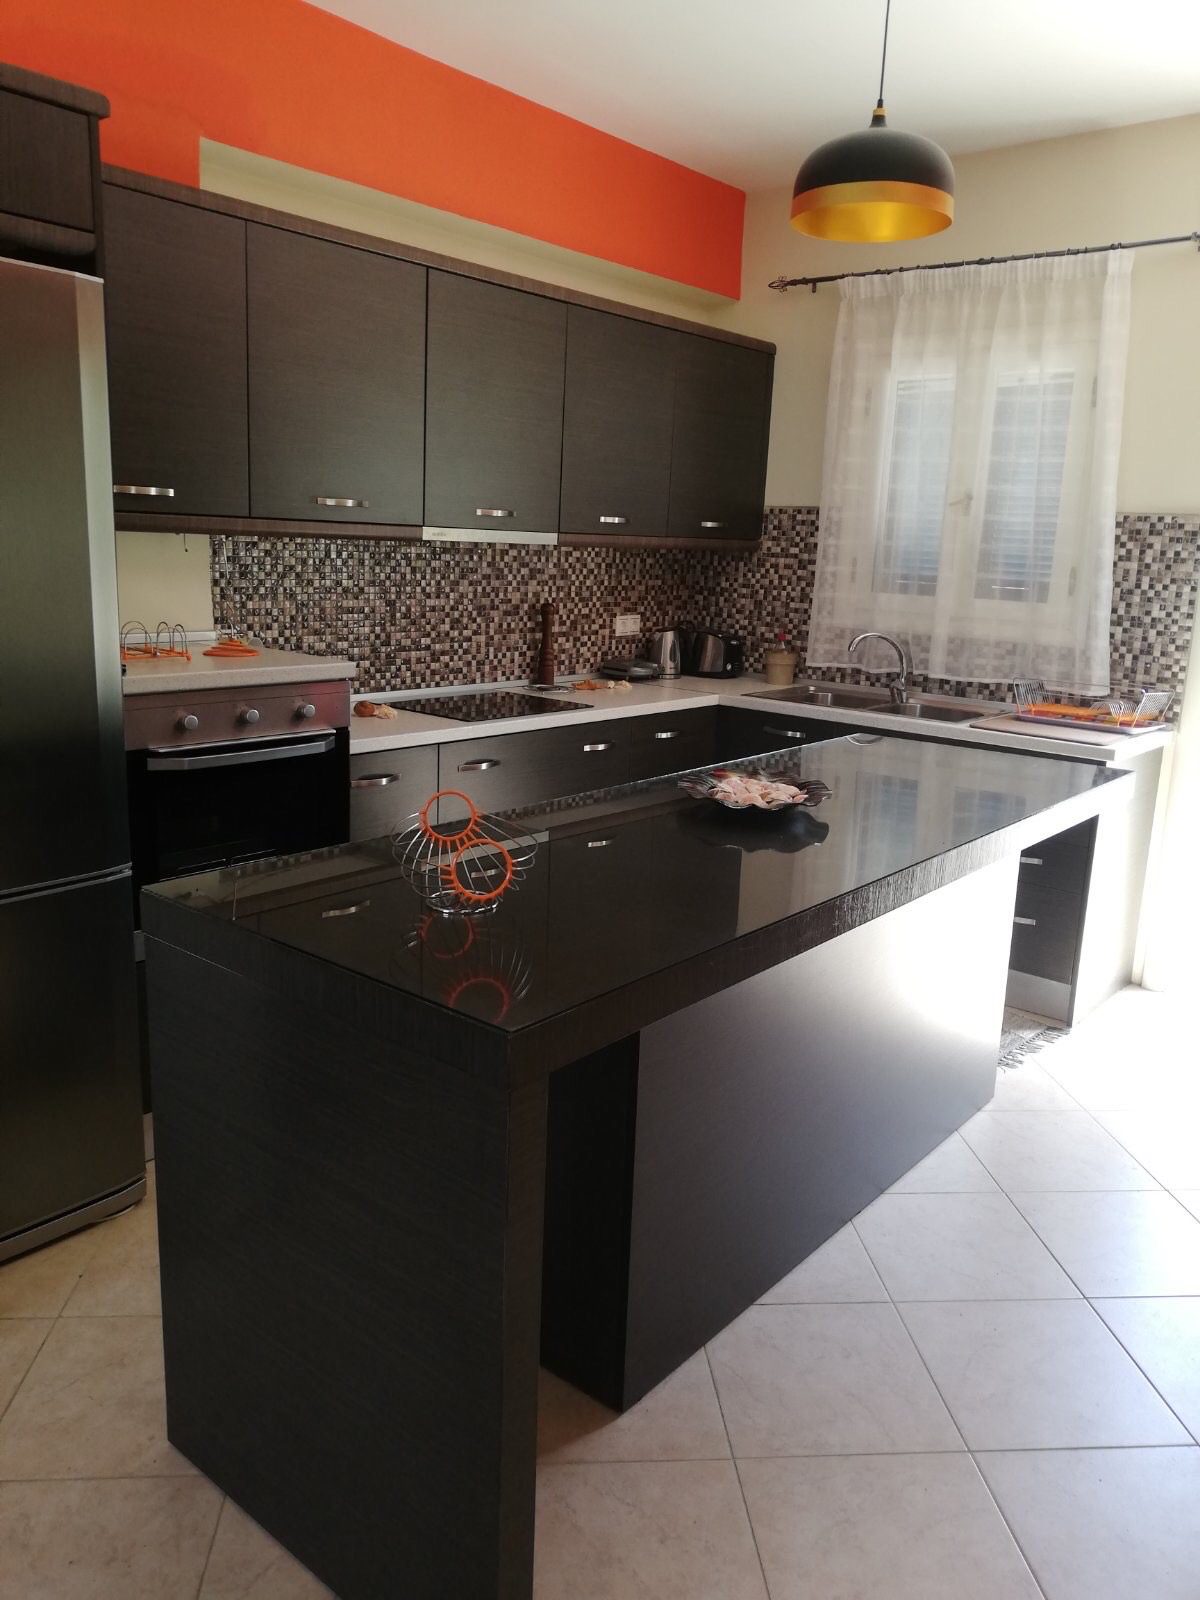 Kitchen of property for sale in Ithaca Greece Vathi